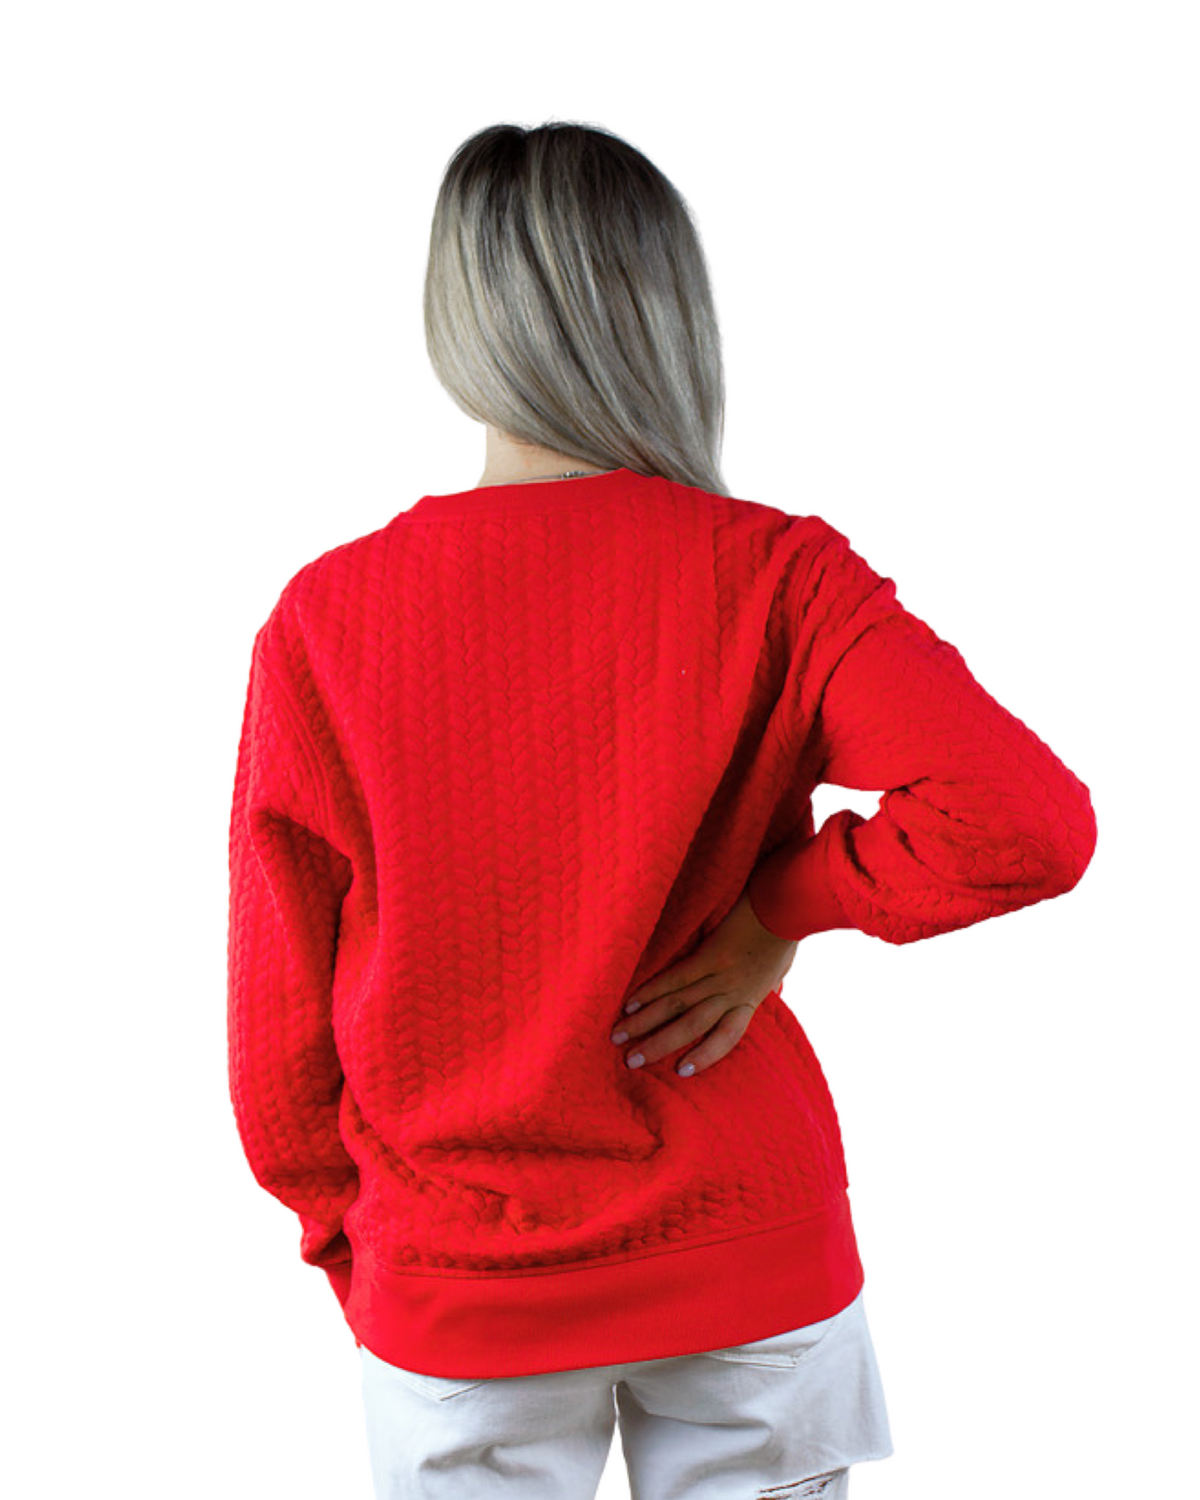 Merry Christmas Red Cableknit Pullover